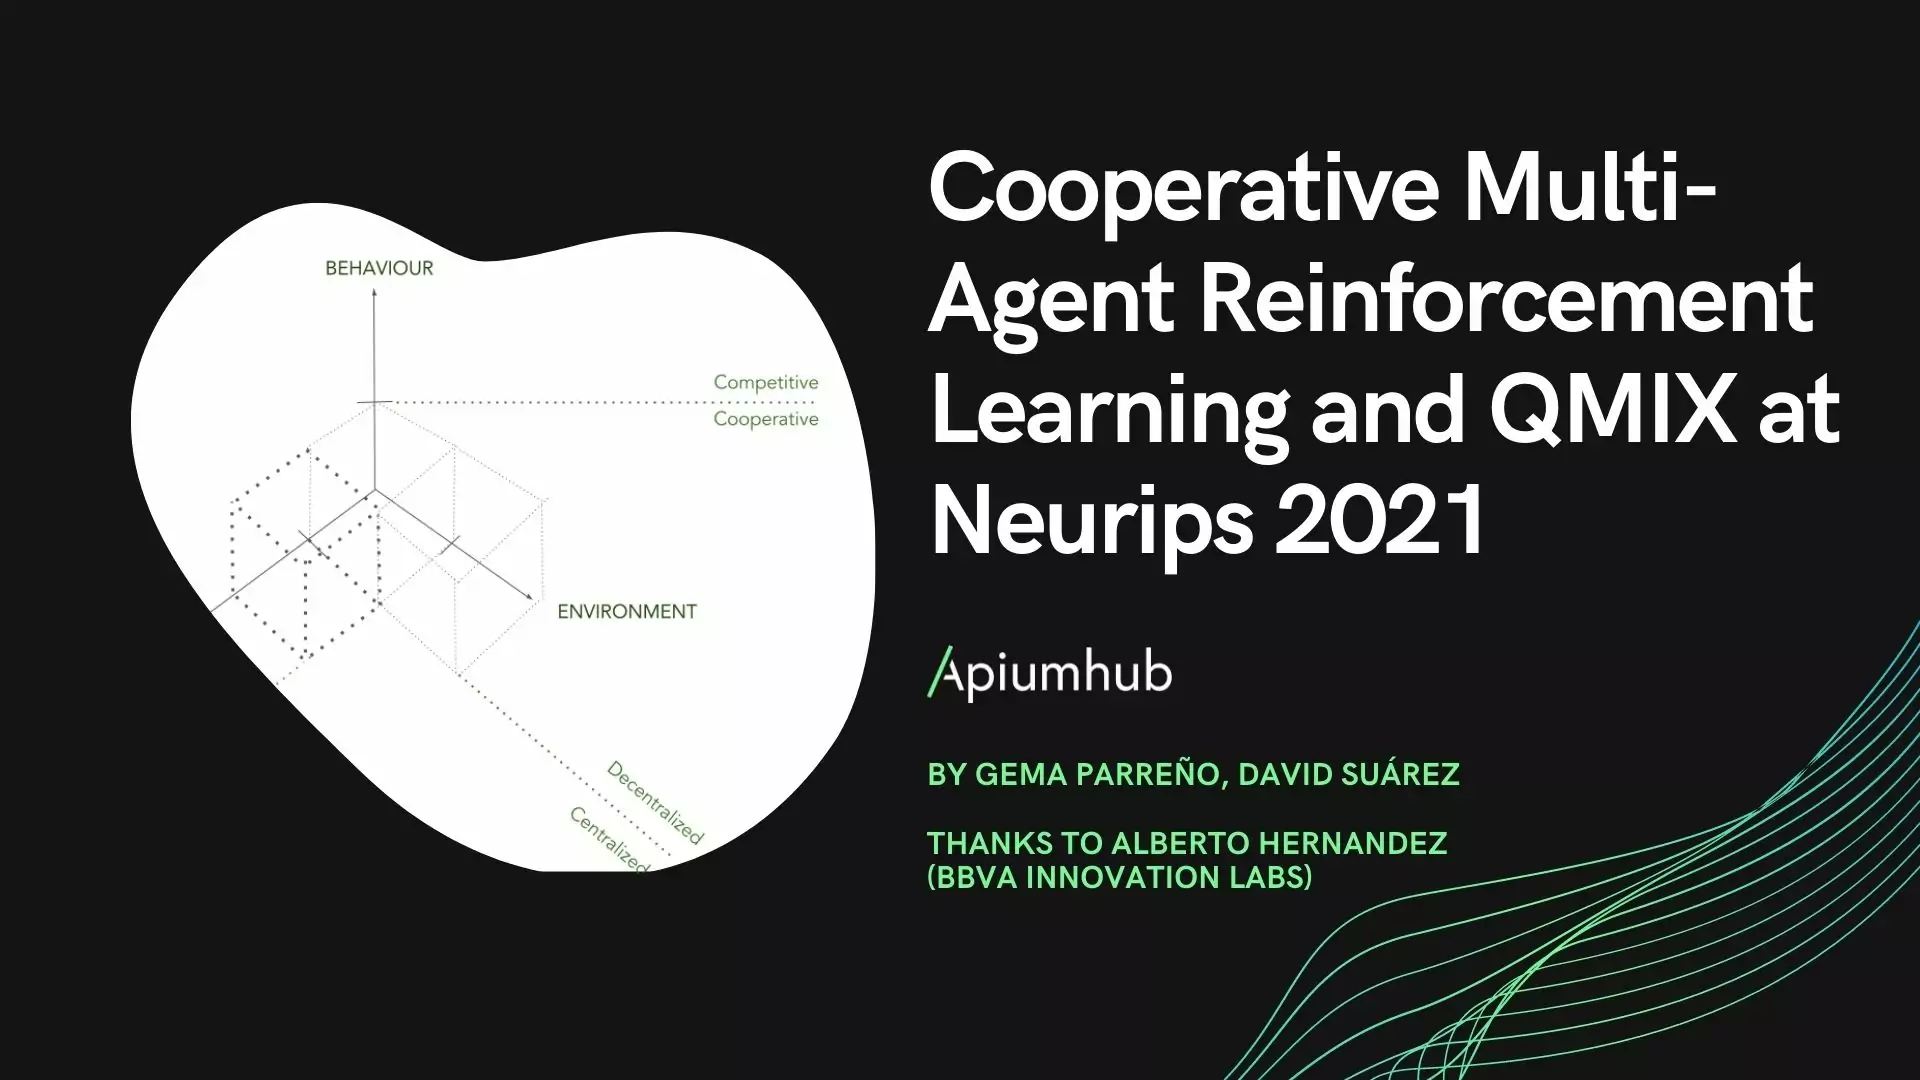 Cooperative Multi-Agent Reinforcement Learning and QMIX at Neurips 2021